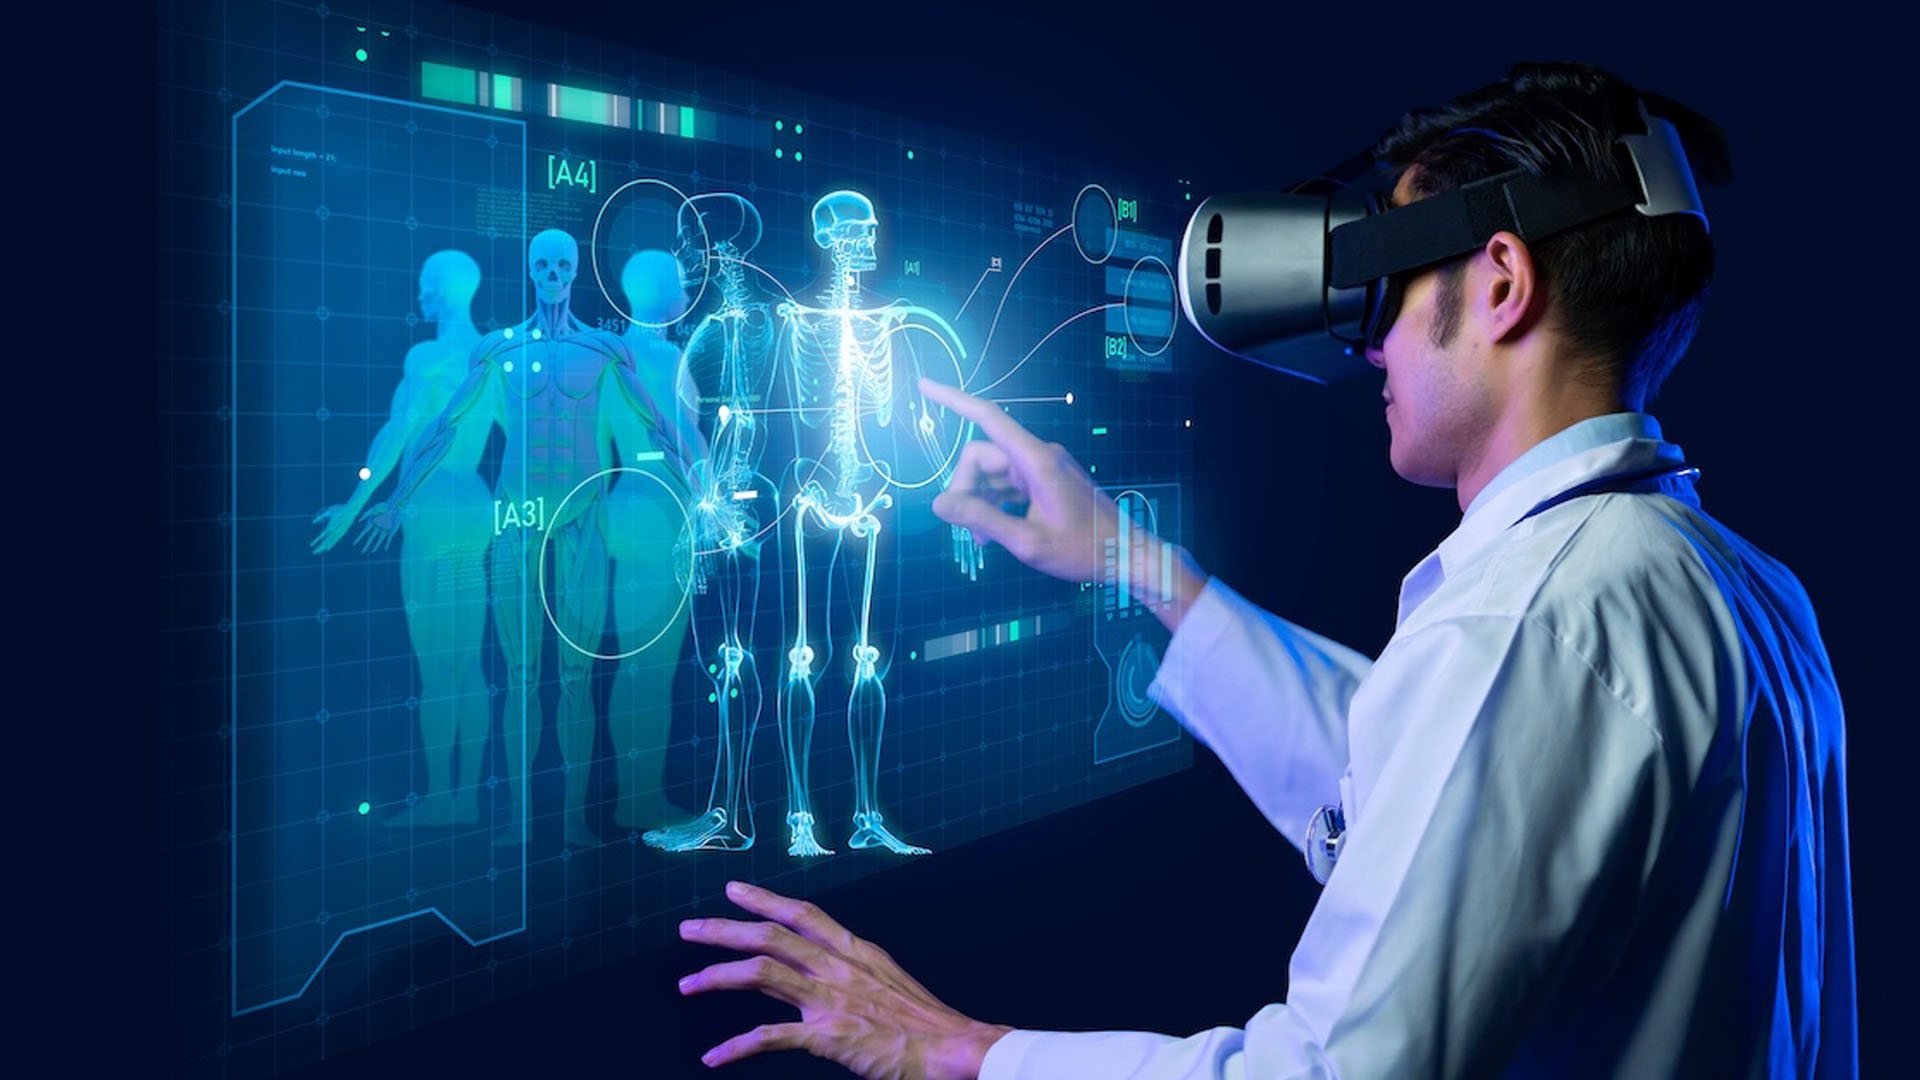 A person in a lab coat using a VR headset to examine digital human anatomy holograms, illustrating the use of VR in medical diagnostics.